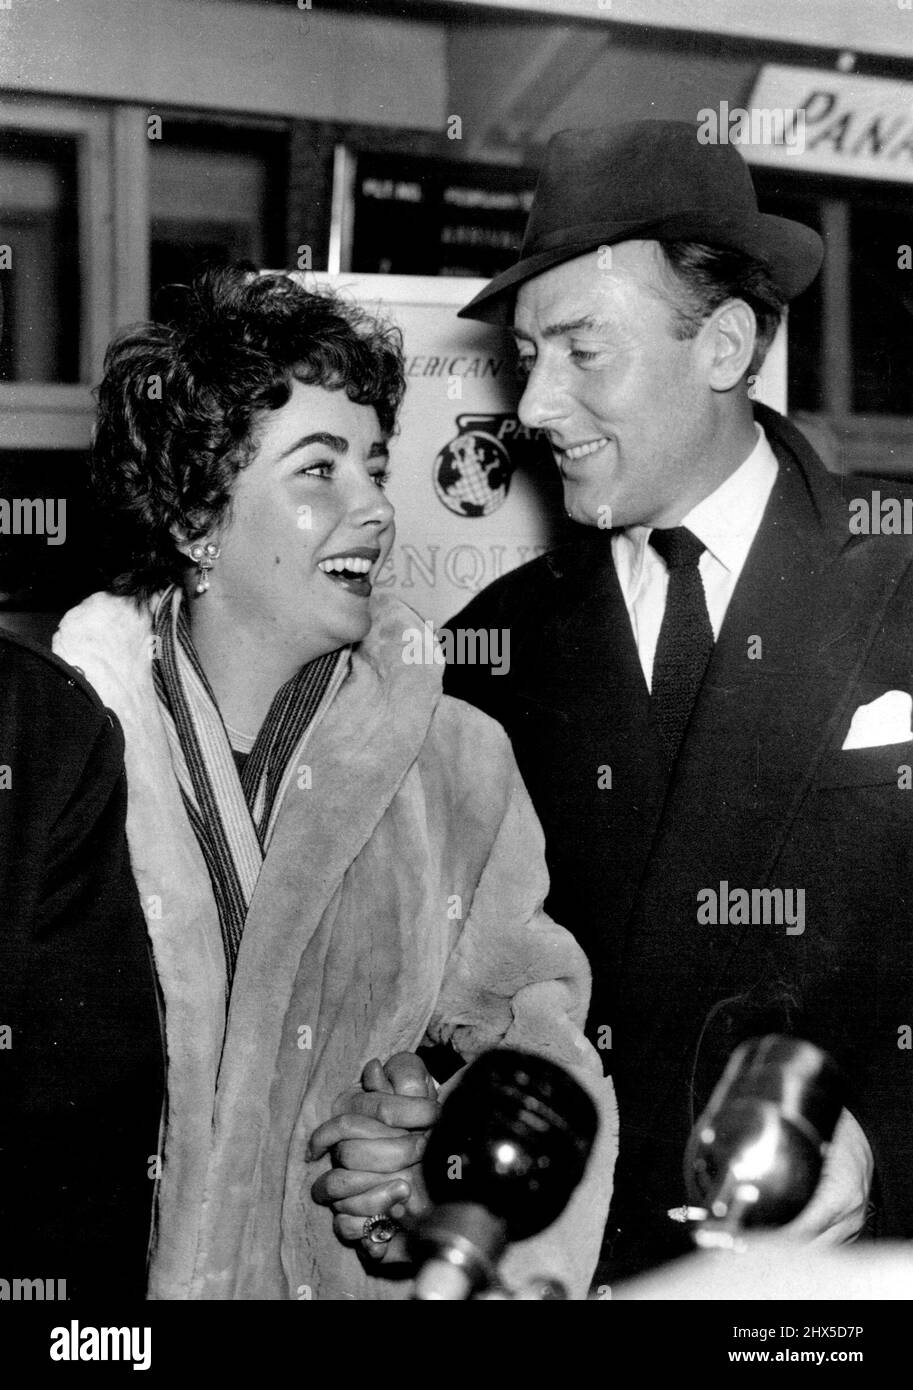 Michael Meets Elizabeth At Airport Wedding This Week -- Happy smiles are exchanged by Elizabeth Taylor and Michael Wilding after the 29-year-old actor had met Elizabeth on her arrival to-night at London airport from America. The couple are expected to marry in London this week-possibly at Caxton Hall. Miss Taylor will be 20 on February 27. Both she and Michael Wilding have been married before. February 19, 1952. (Photo by Planet News) Stock Photo